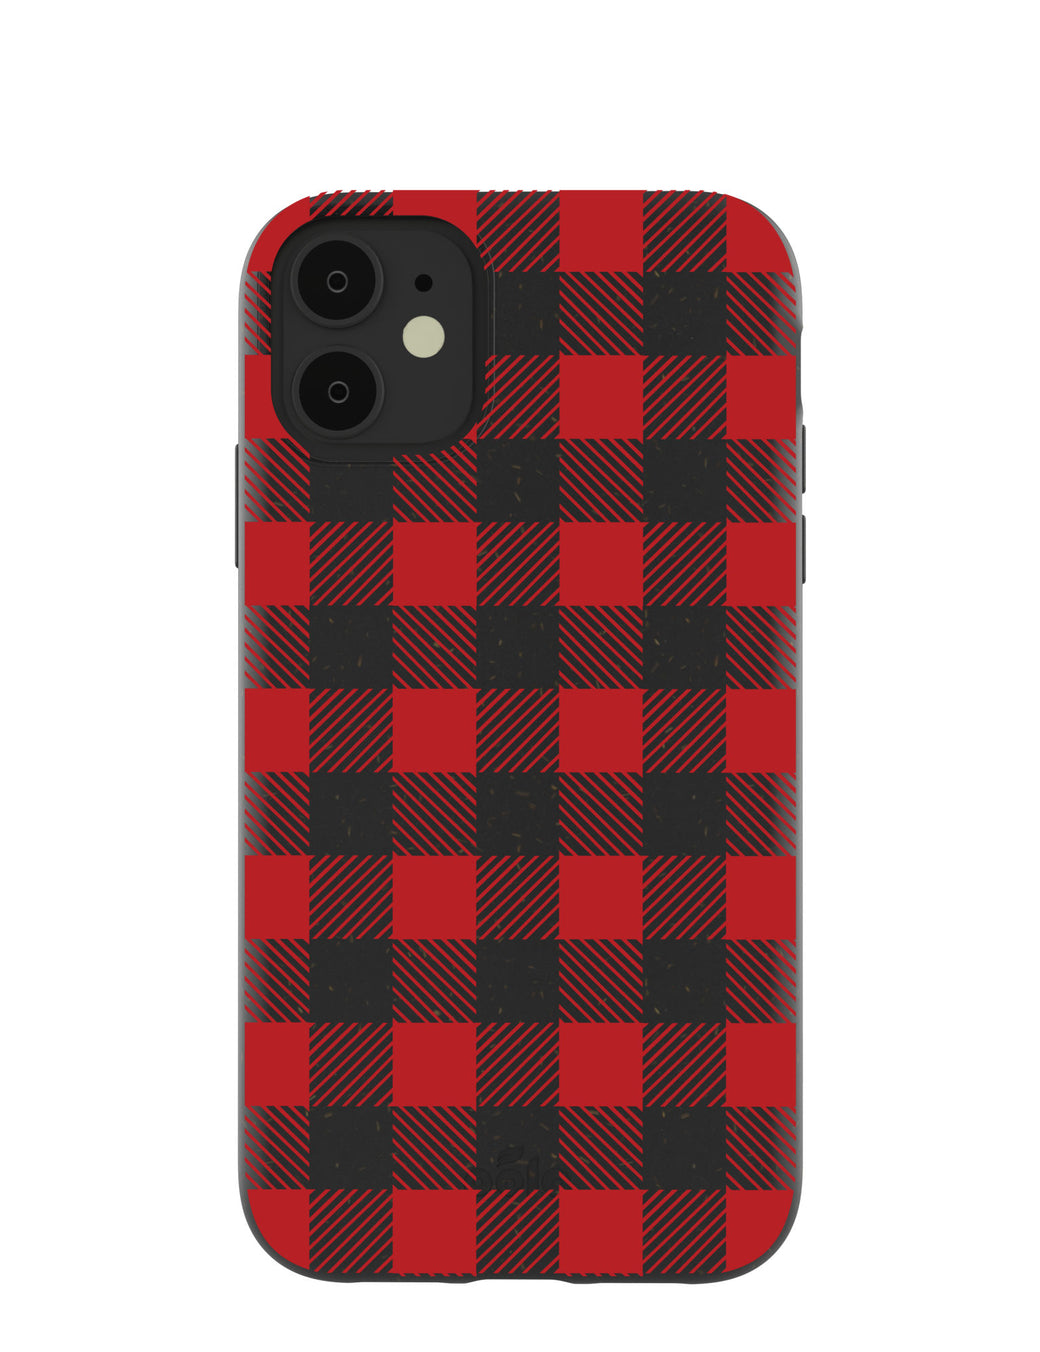 Black Flannel iPhone 11 Case